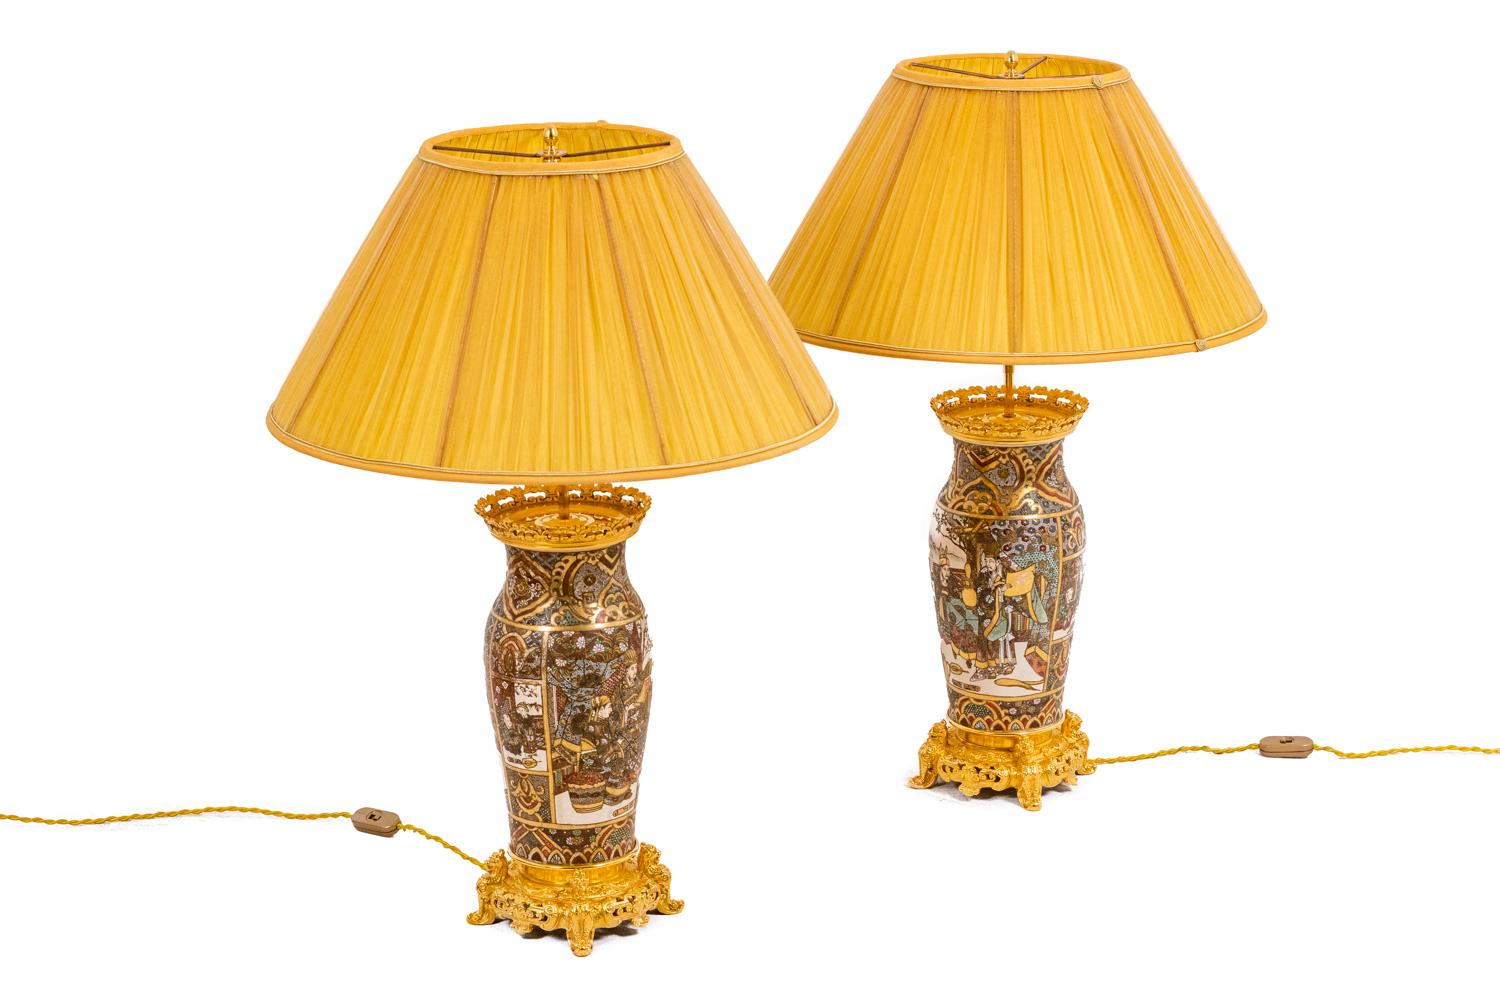 Pair lamps in fine earthenware from Satsuma gilt bronze adorned with characters. Color predominantly gold. Ovoid shape surmounted by a neck. White cartridges on a golden background. Base and frame in gilded and chiseled bronze with openwork,